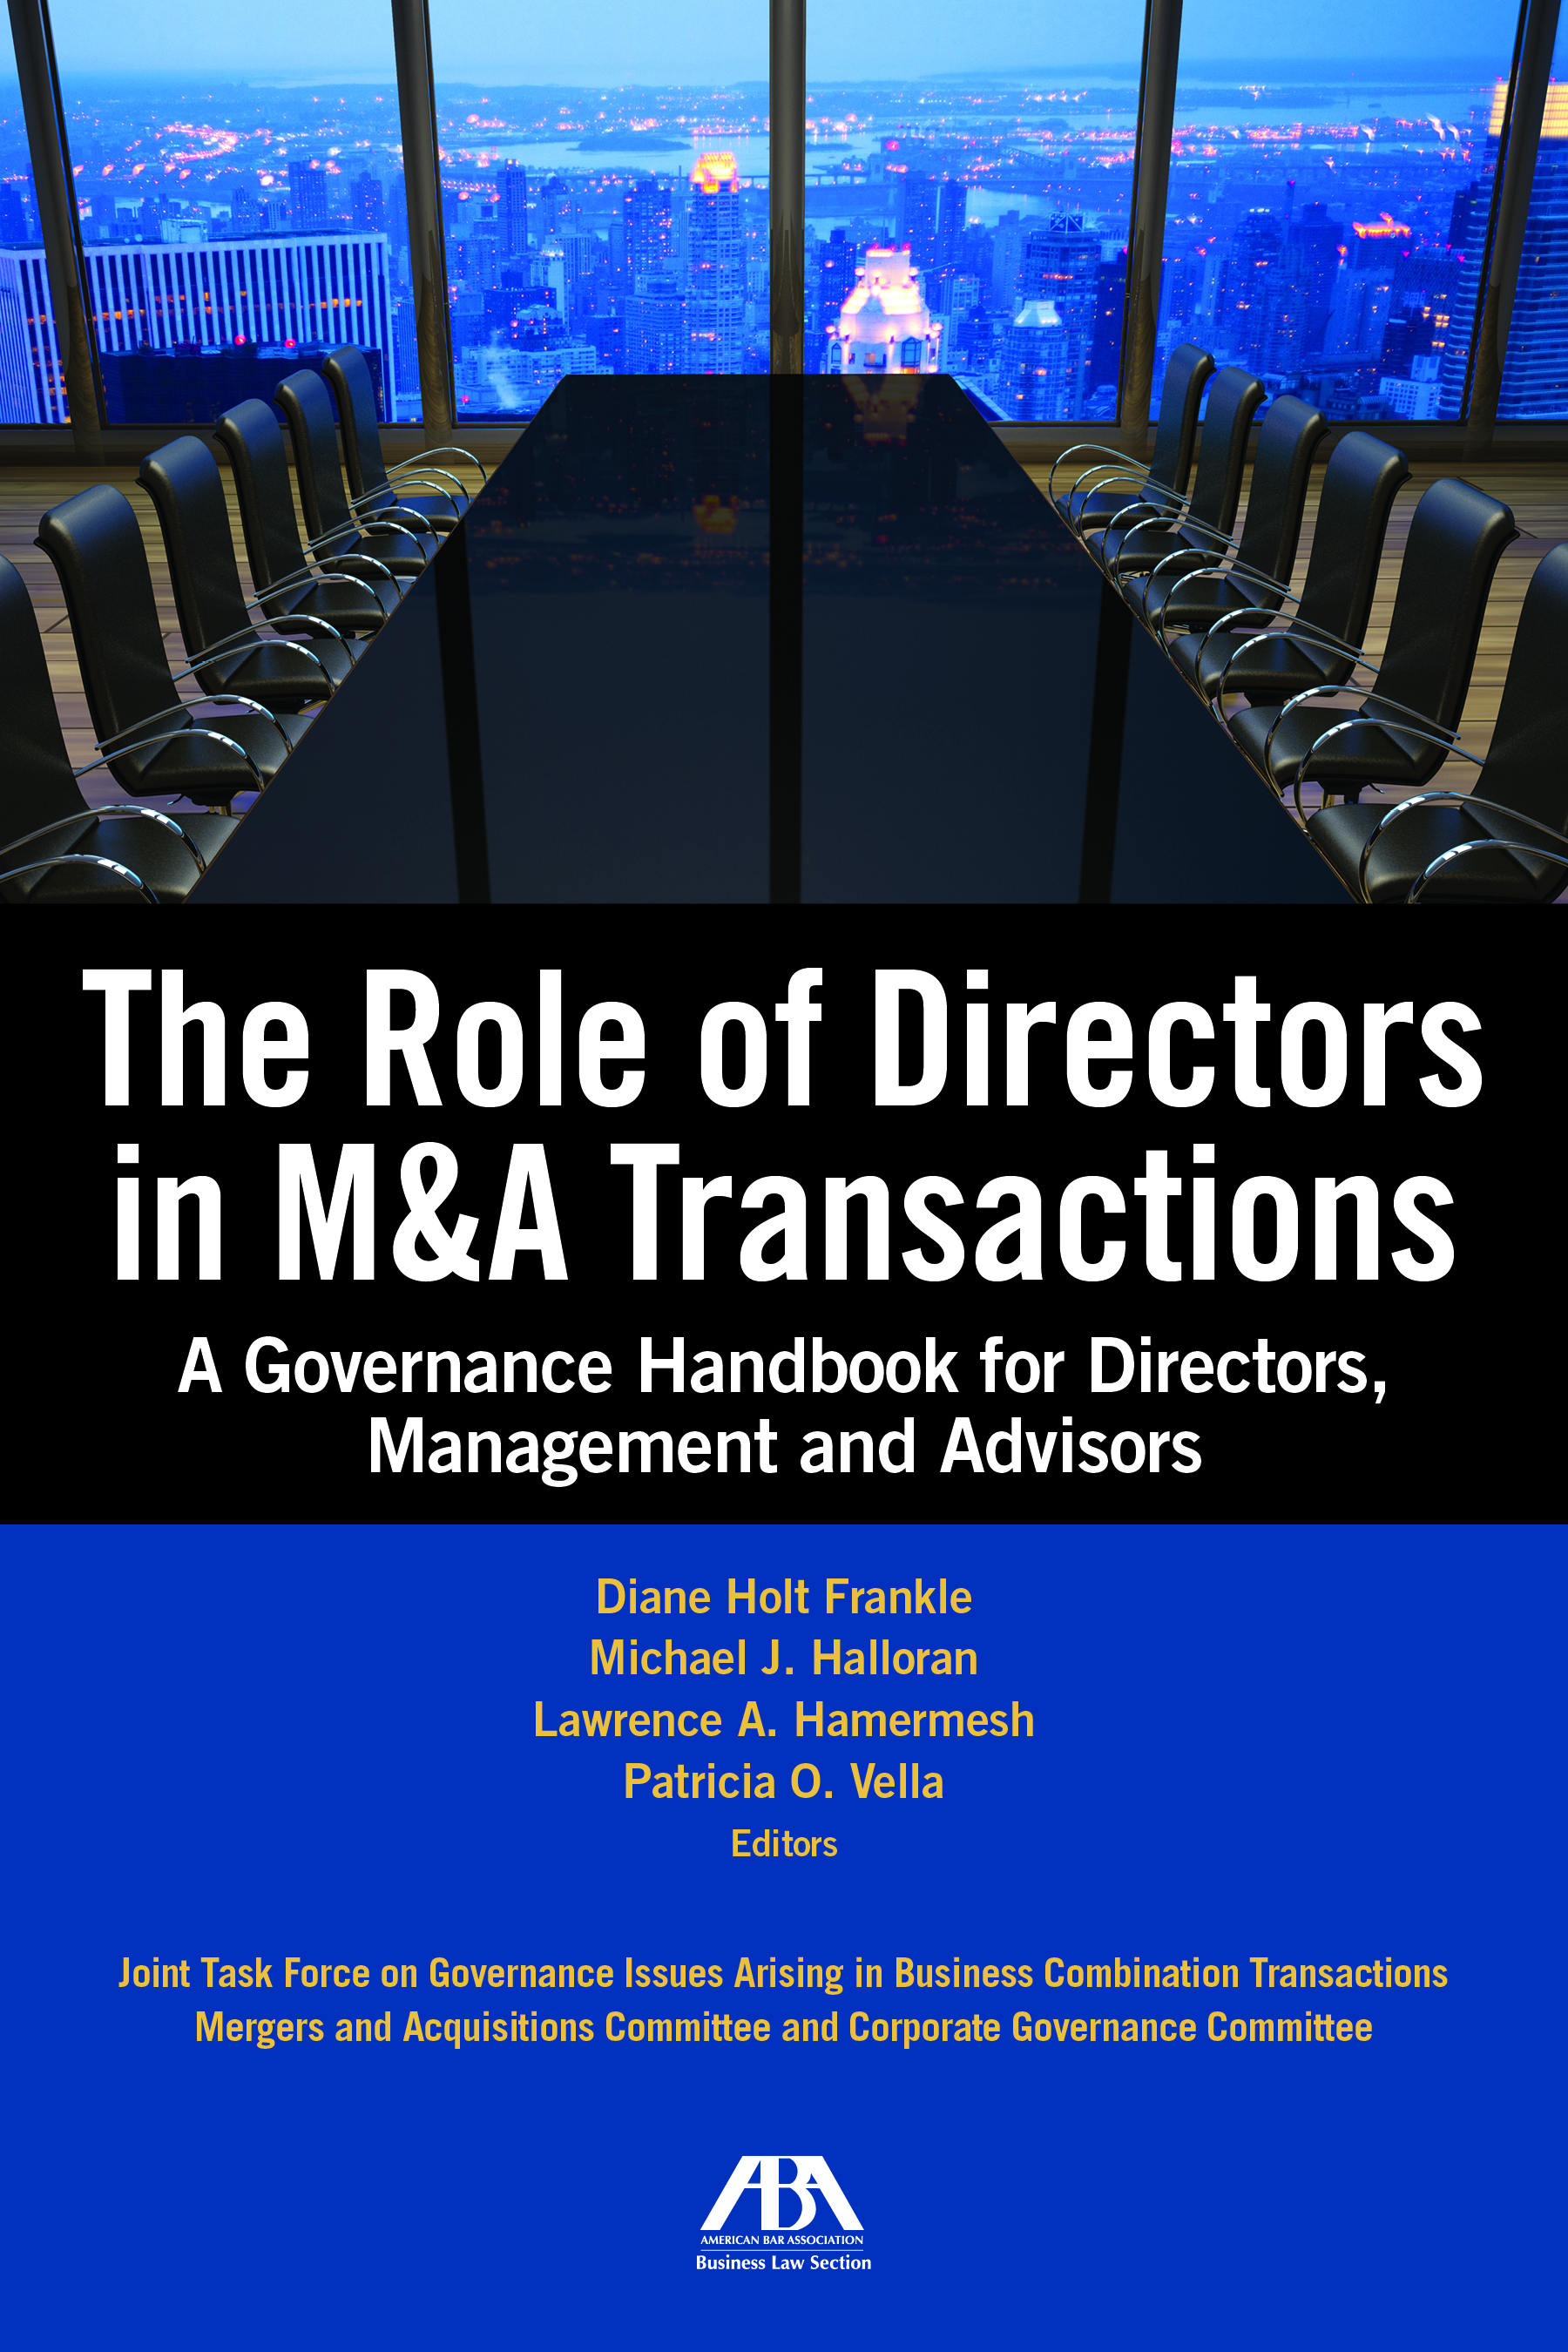 Book Cover of The Role of Directors in M&A Transactions